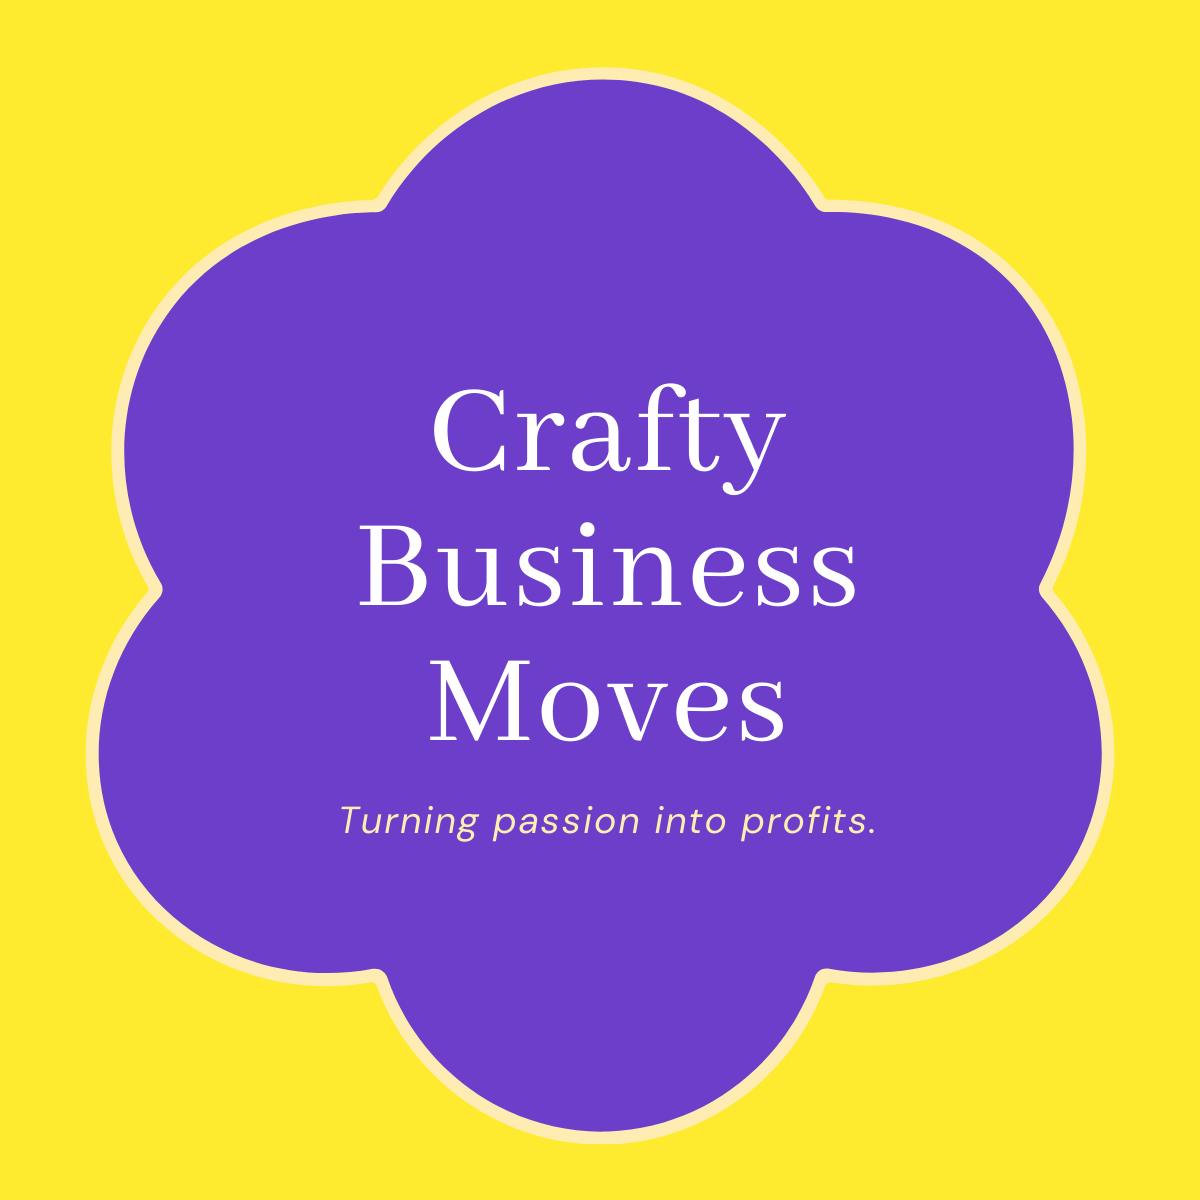 Crafty Business Moves